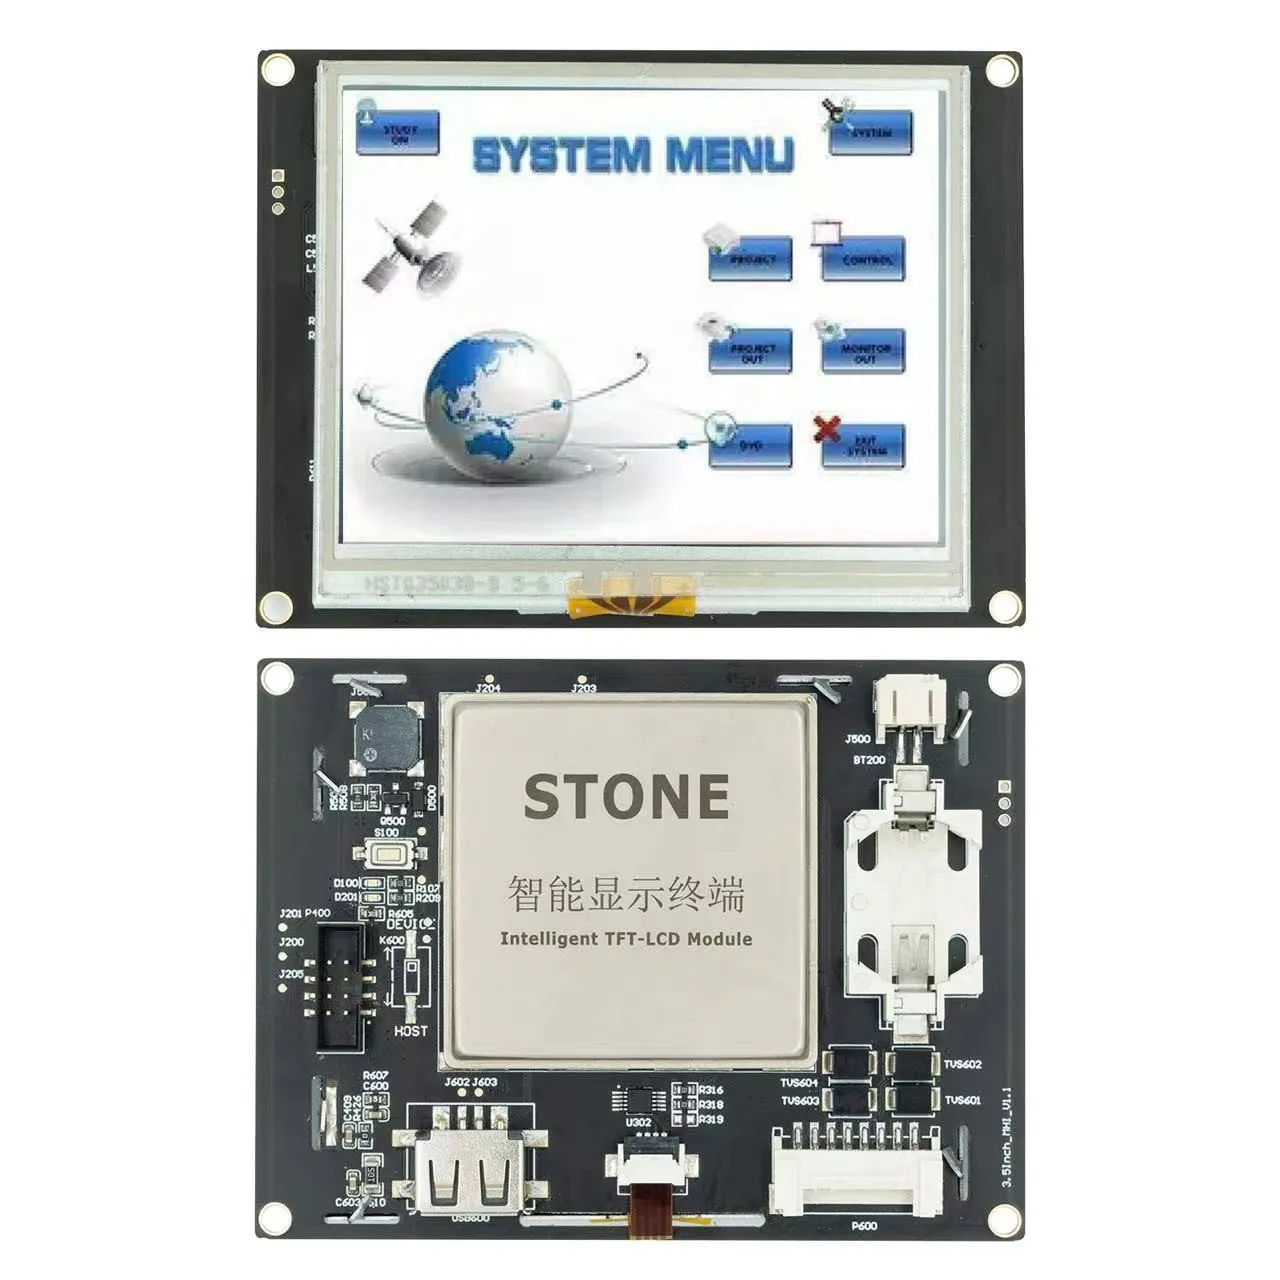 Smart HMI 3.5inch TFT LCD module Windows system PC or MacOS PC, or you can also design on website version directly